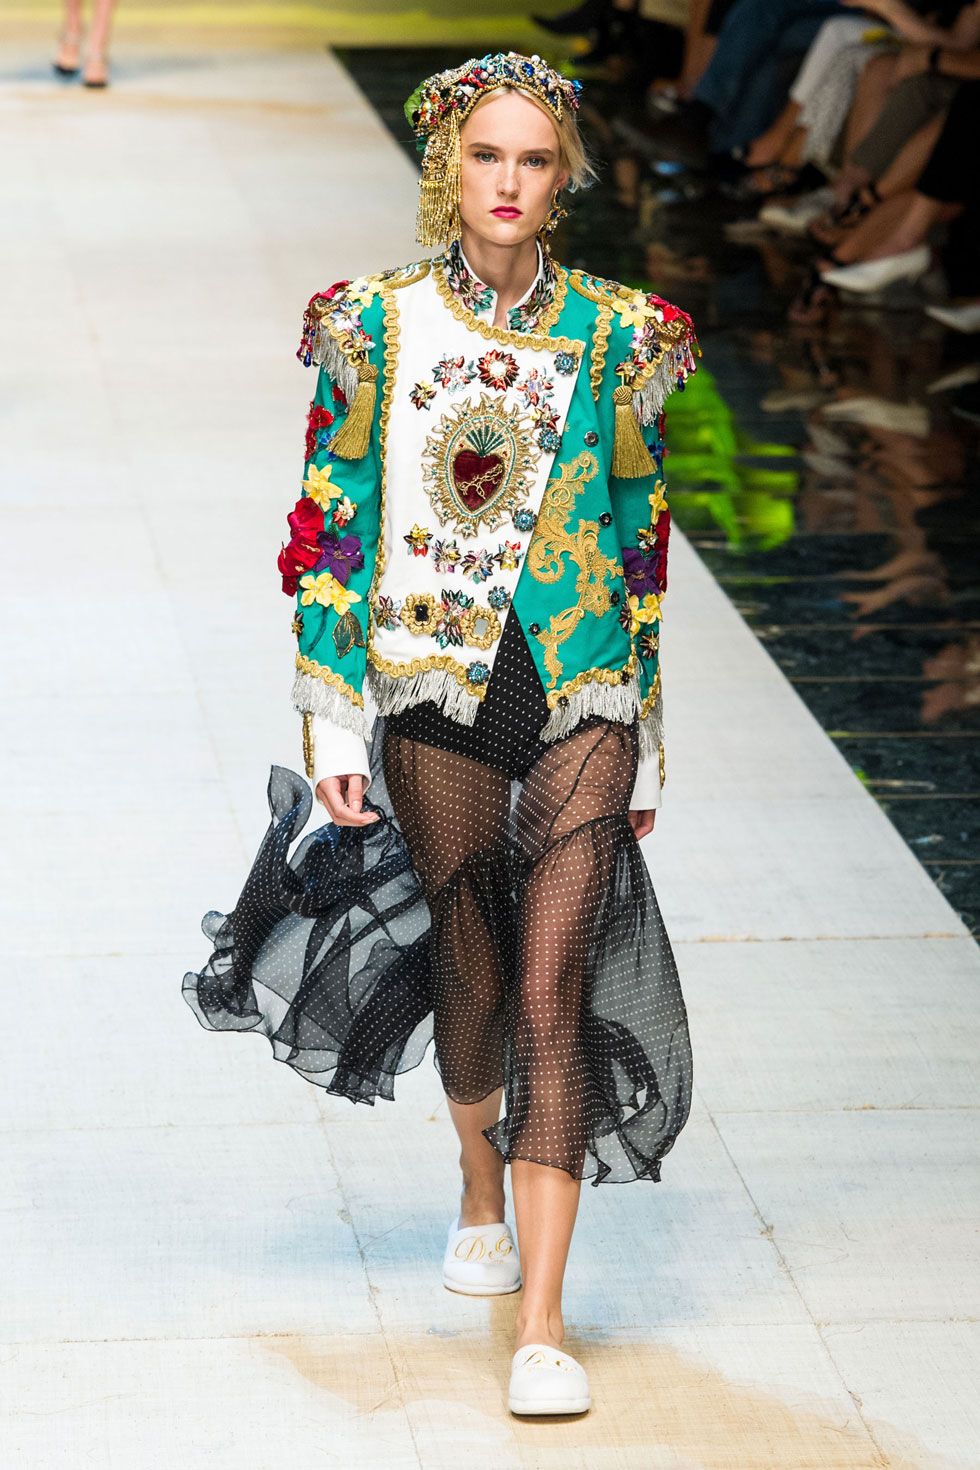 91 Looks From the Dolce & Gabbana Spring 2017 Show - Dolce